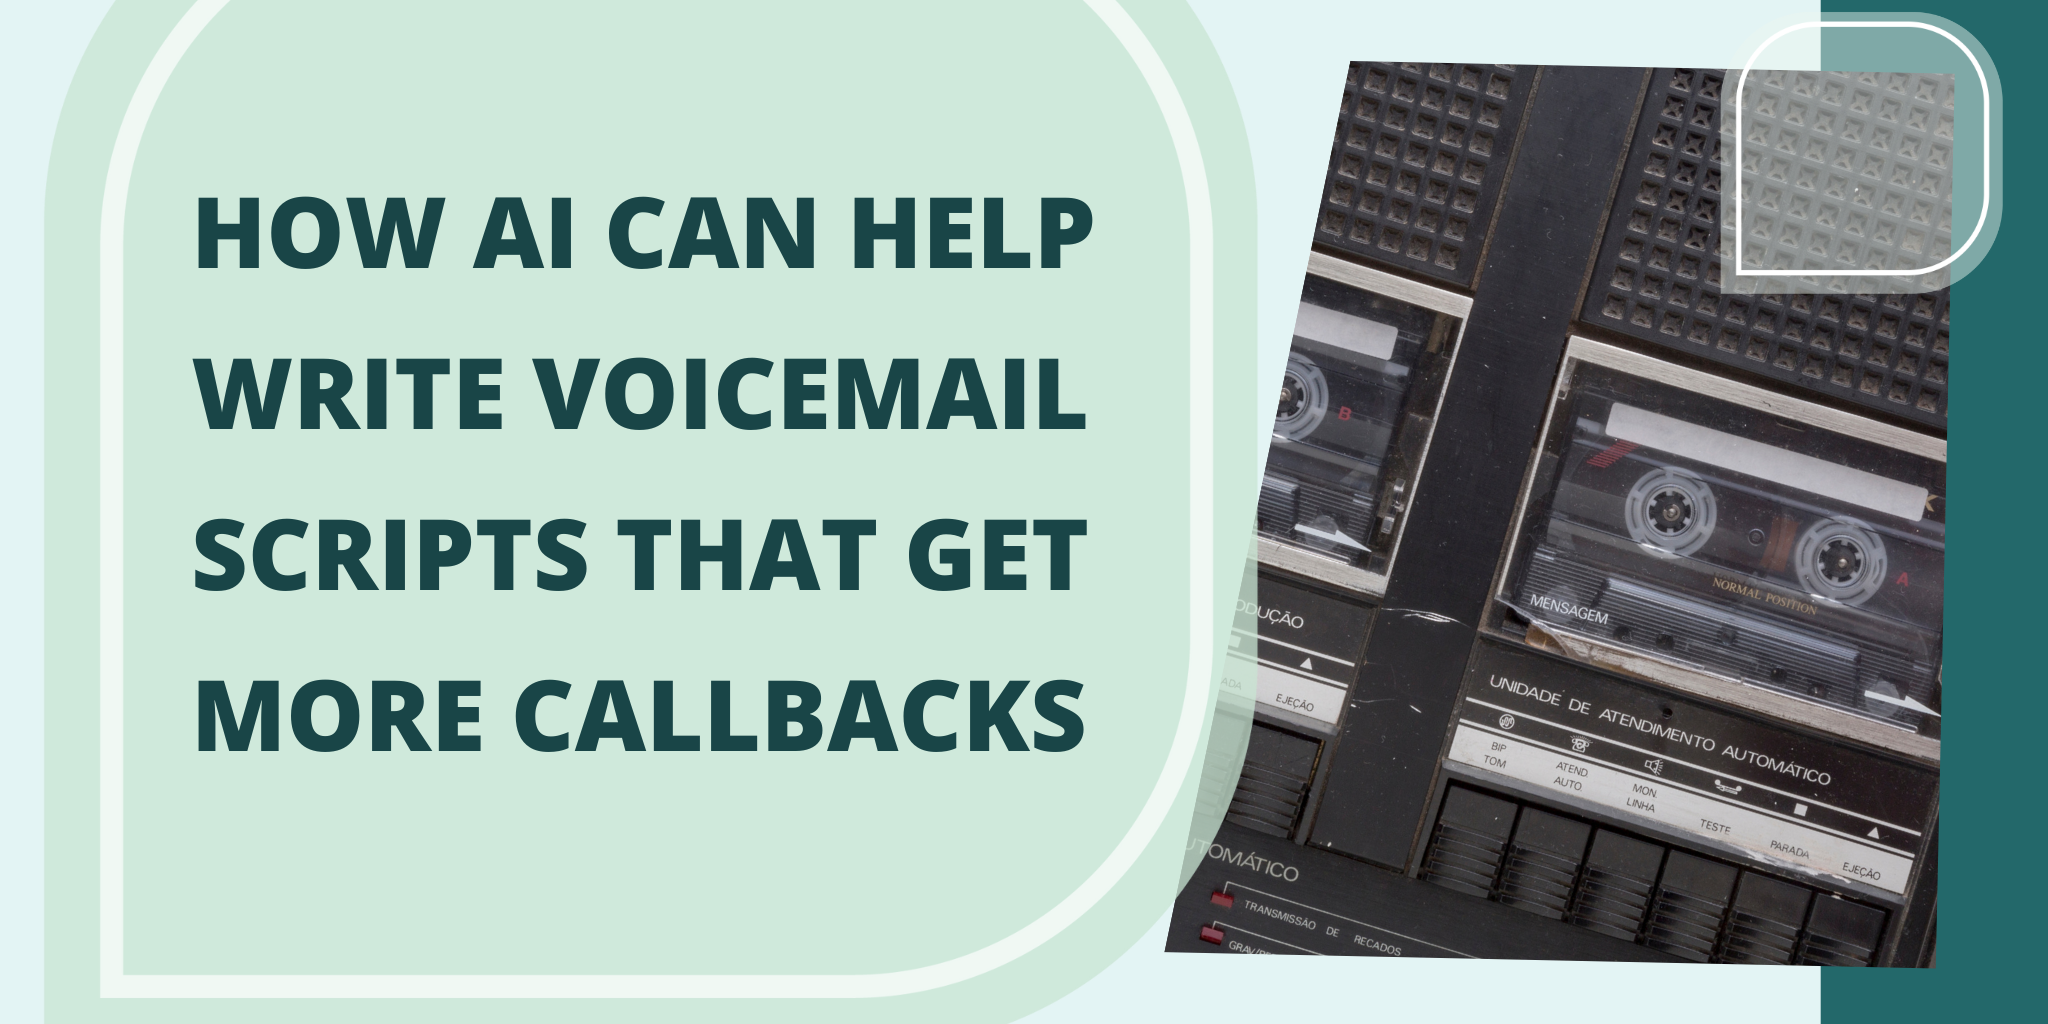 How to Use AI to Leave Better Voicemails and Increase Callbacks | Telephones for business